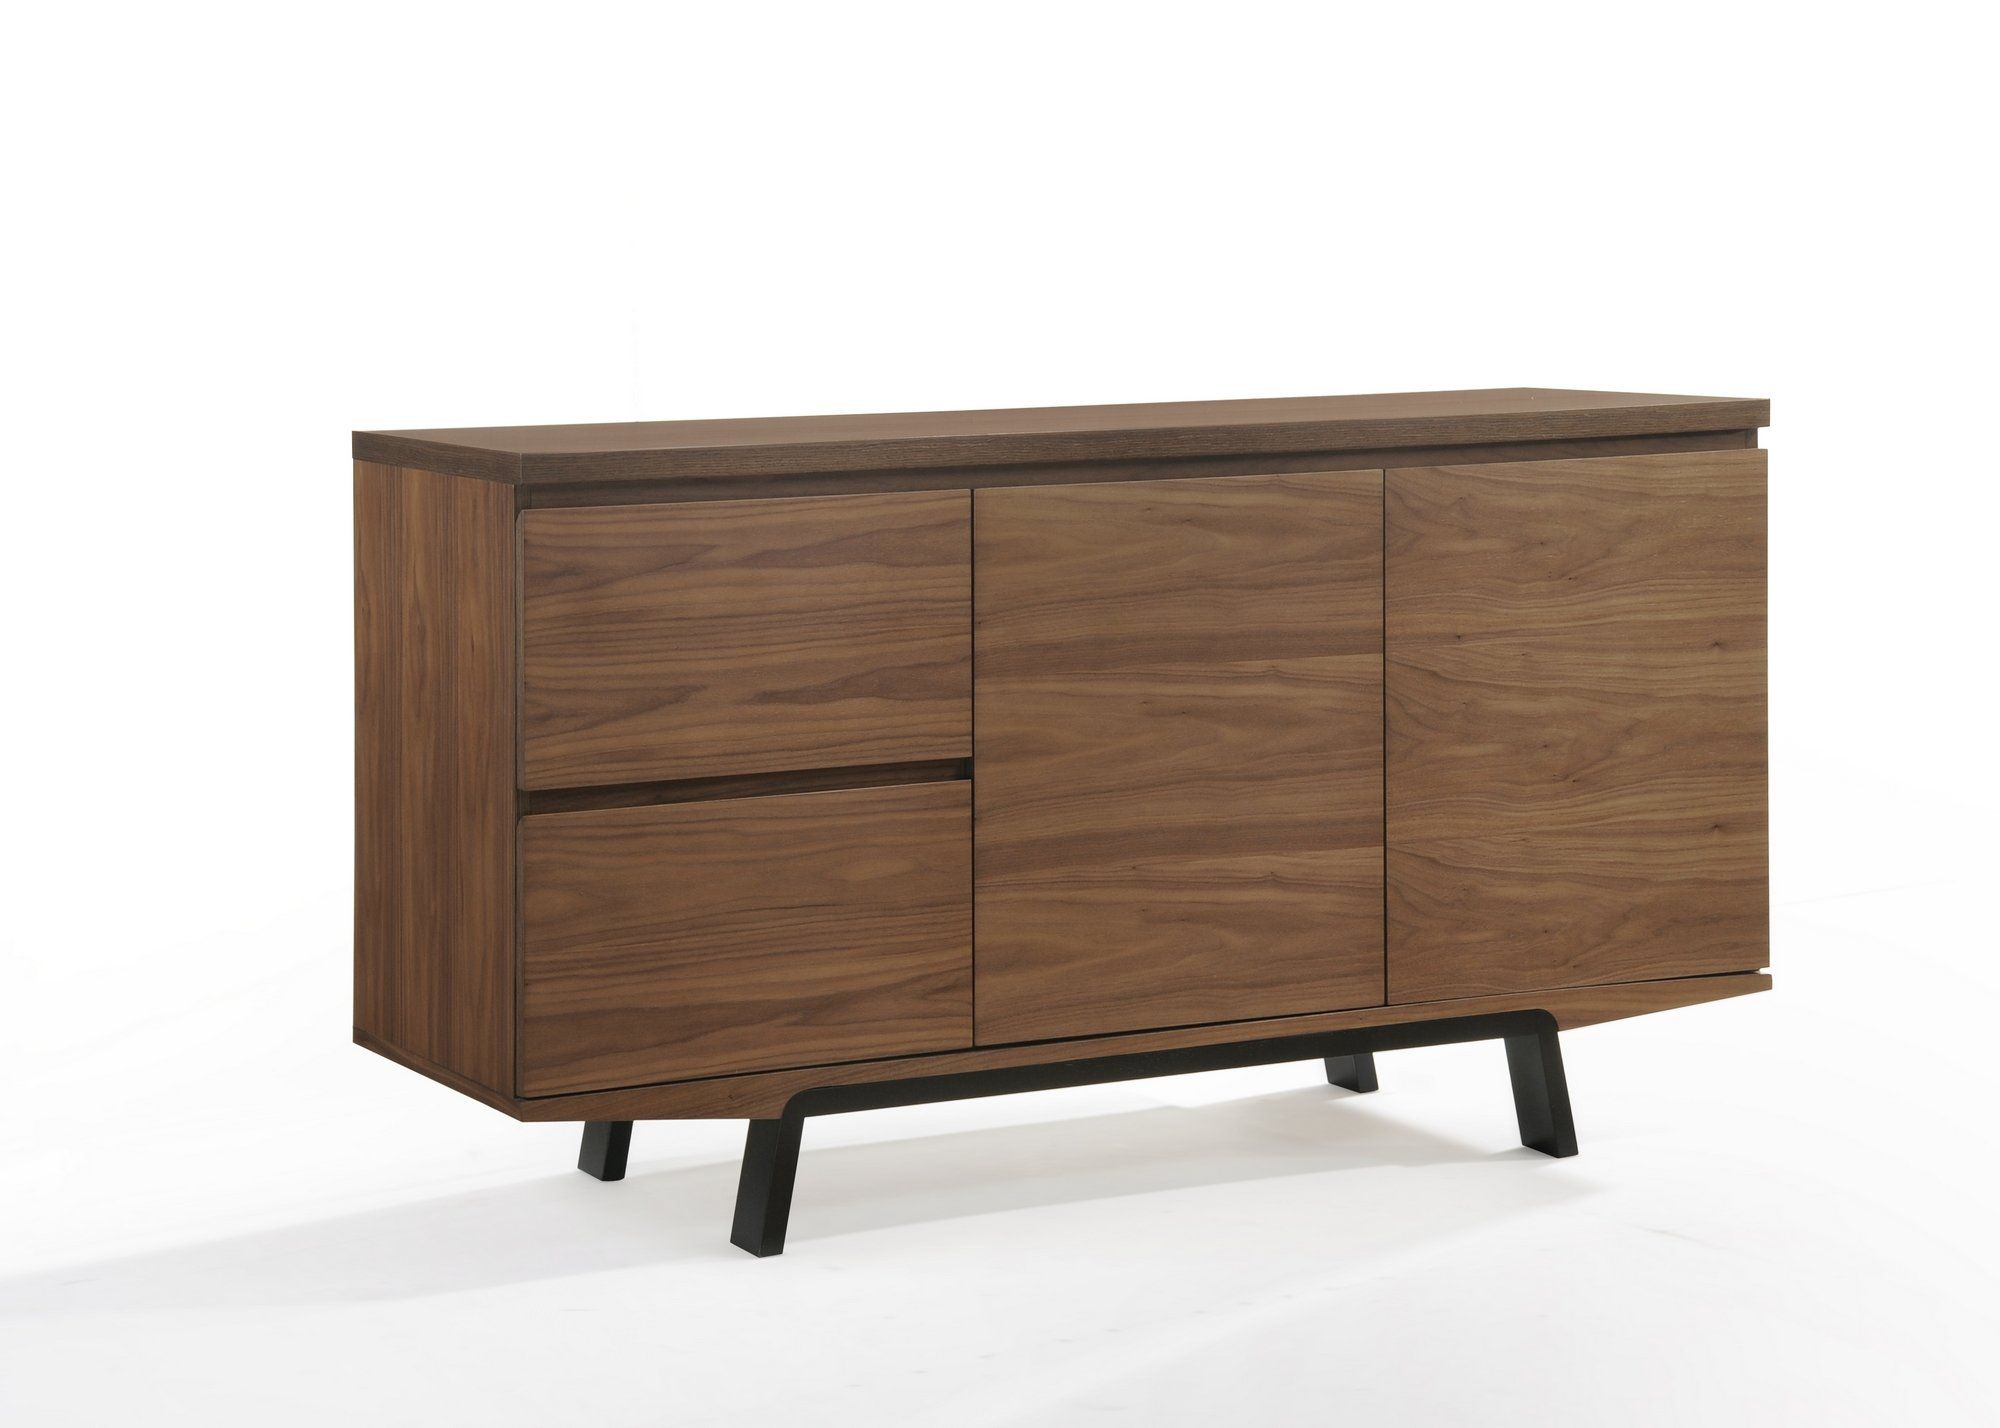 Chittum Sideboard Throughout Most Recently Released Dovray Sideboards (View 19 of 20)